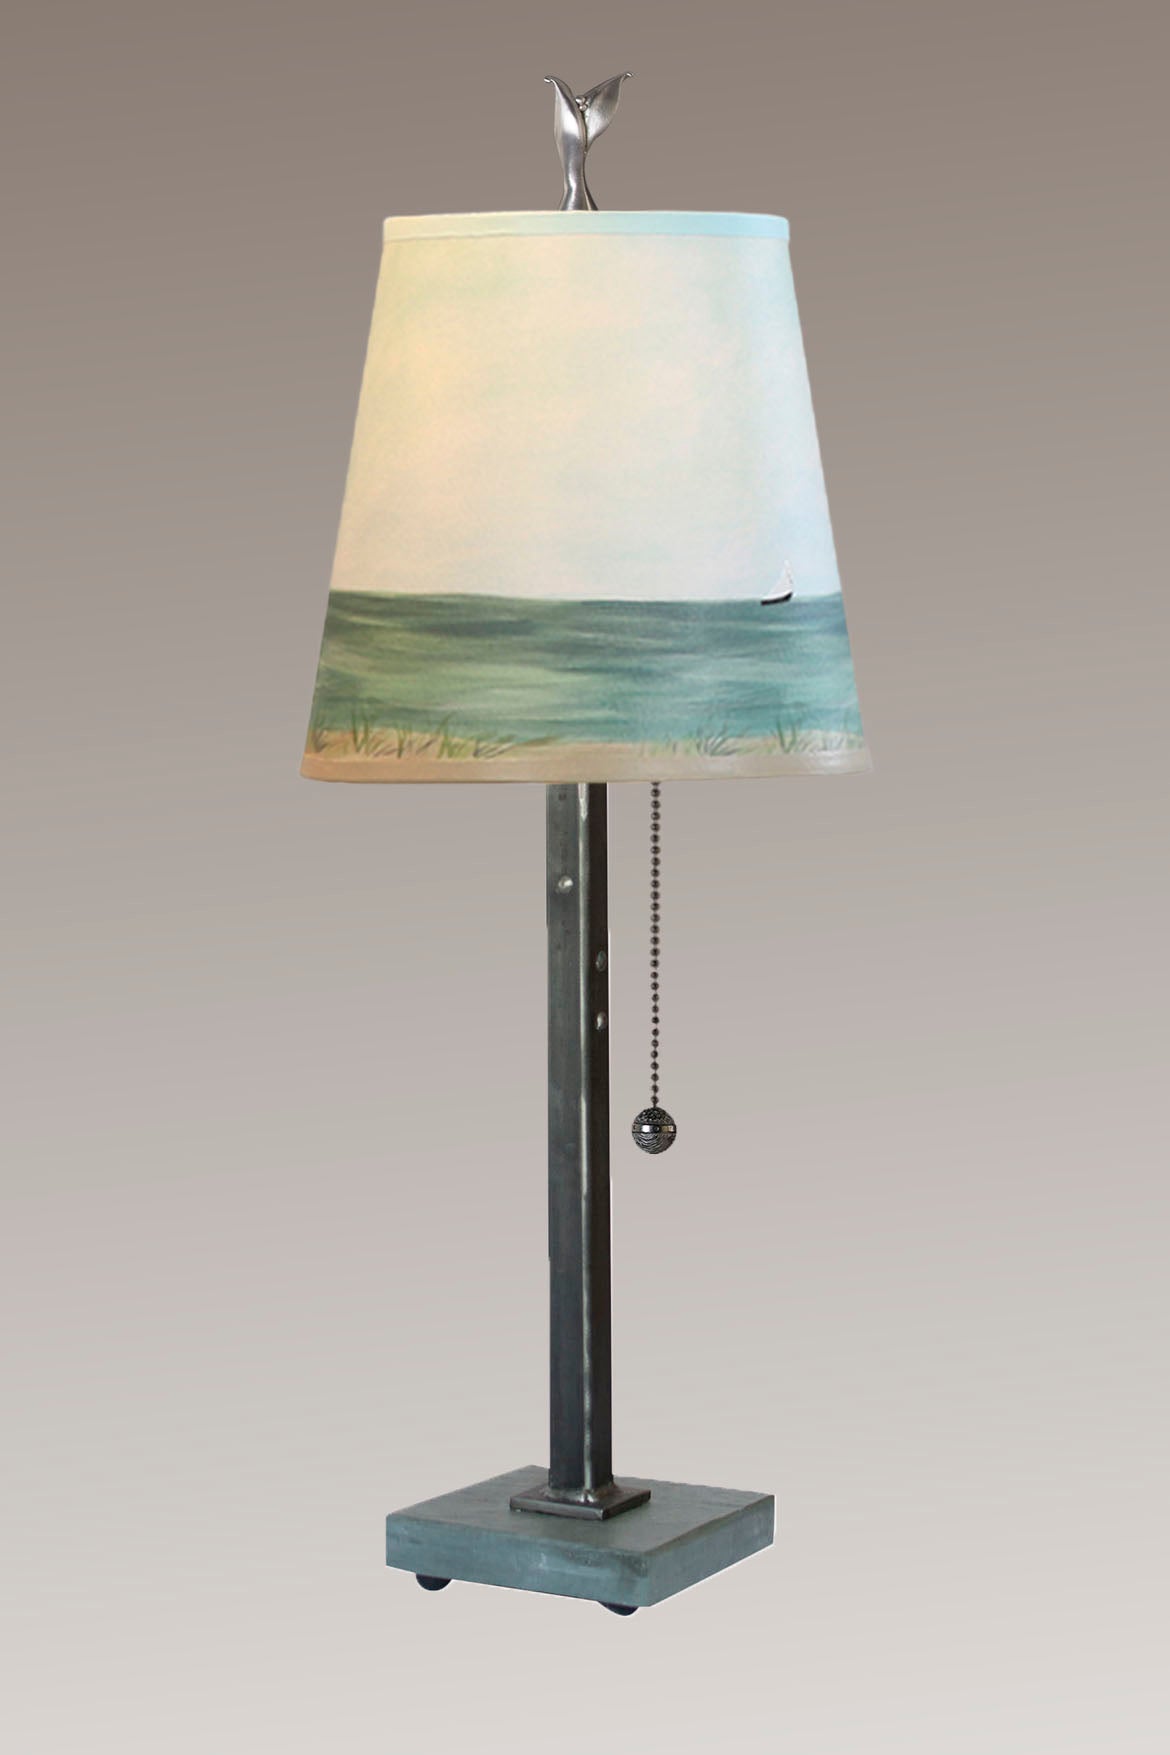 Steel Table Lamp with Small Drum Shade in Shore